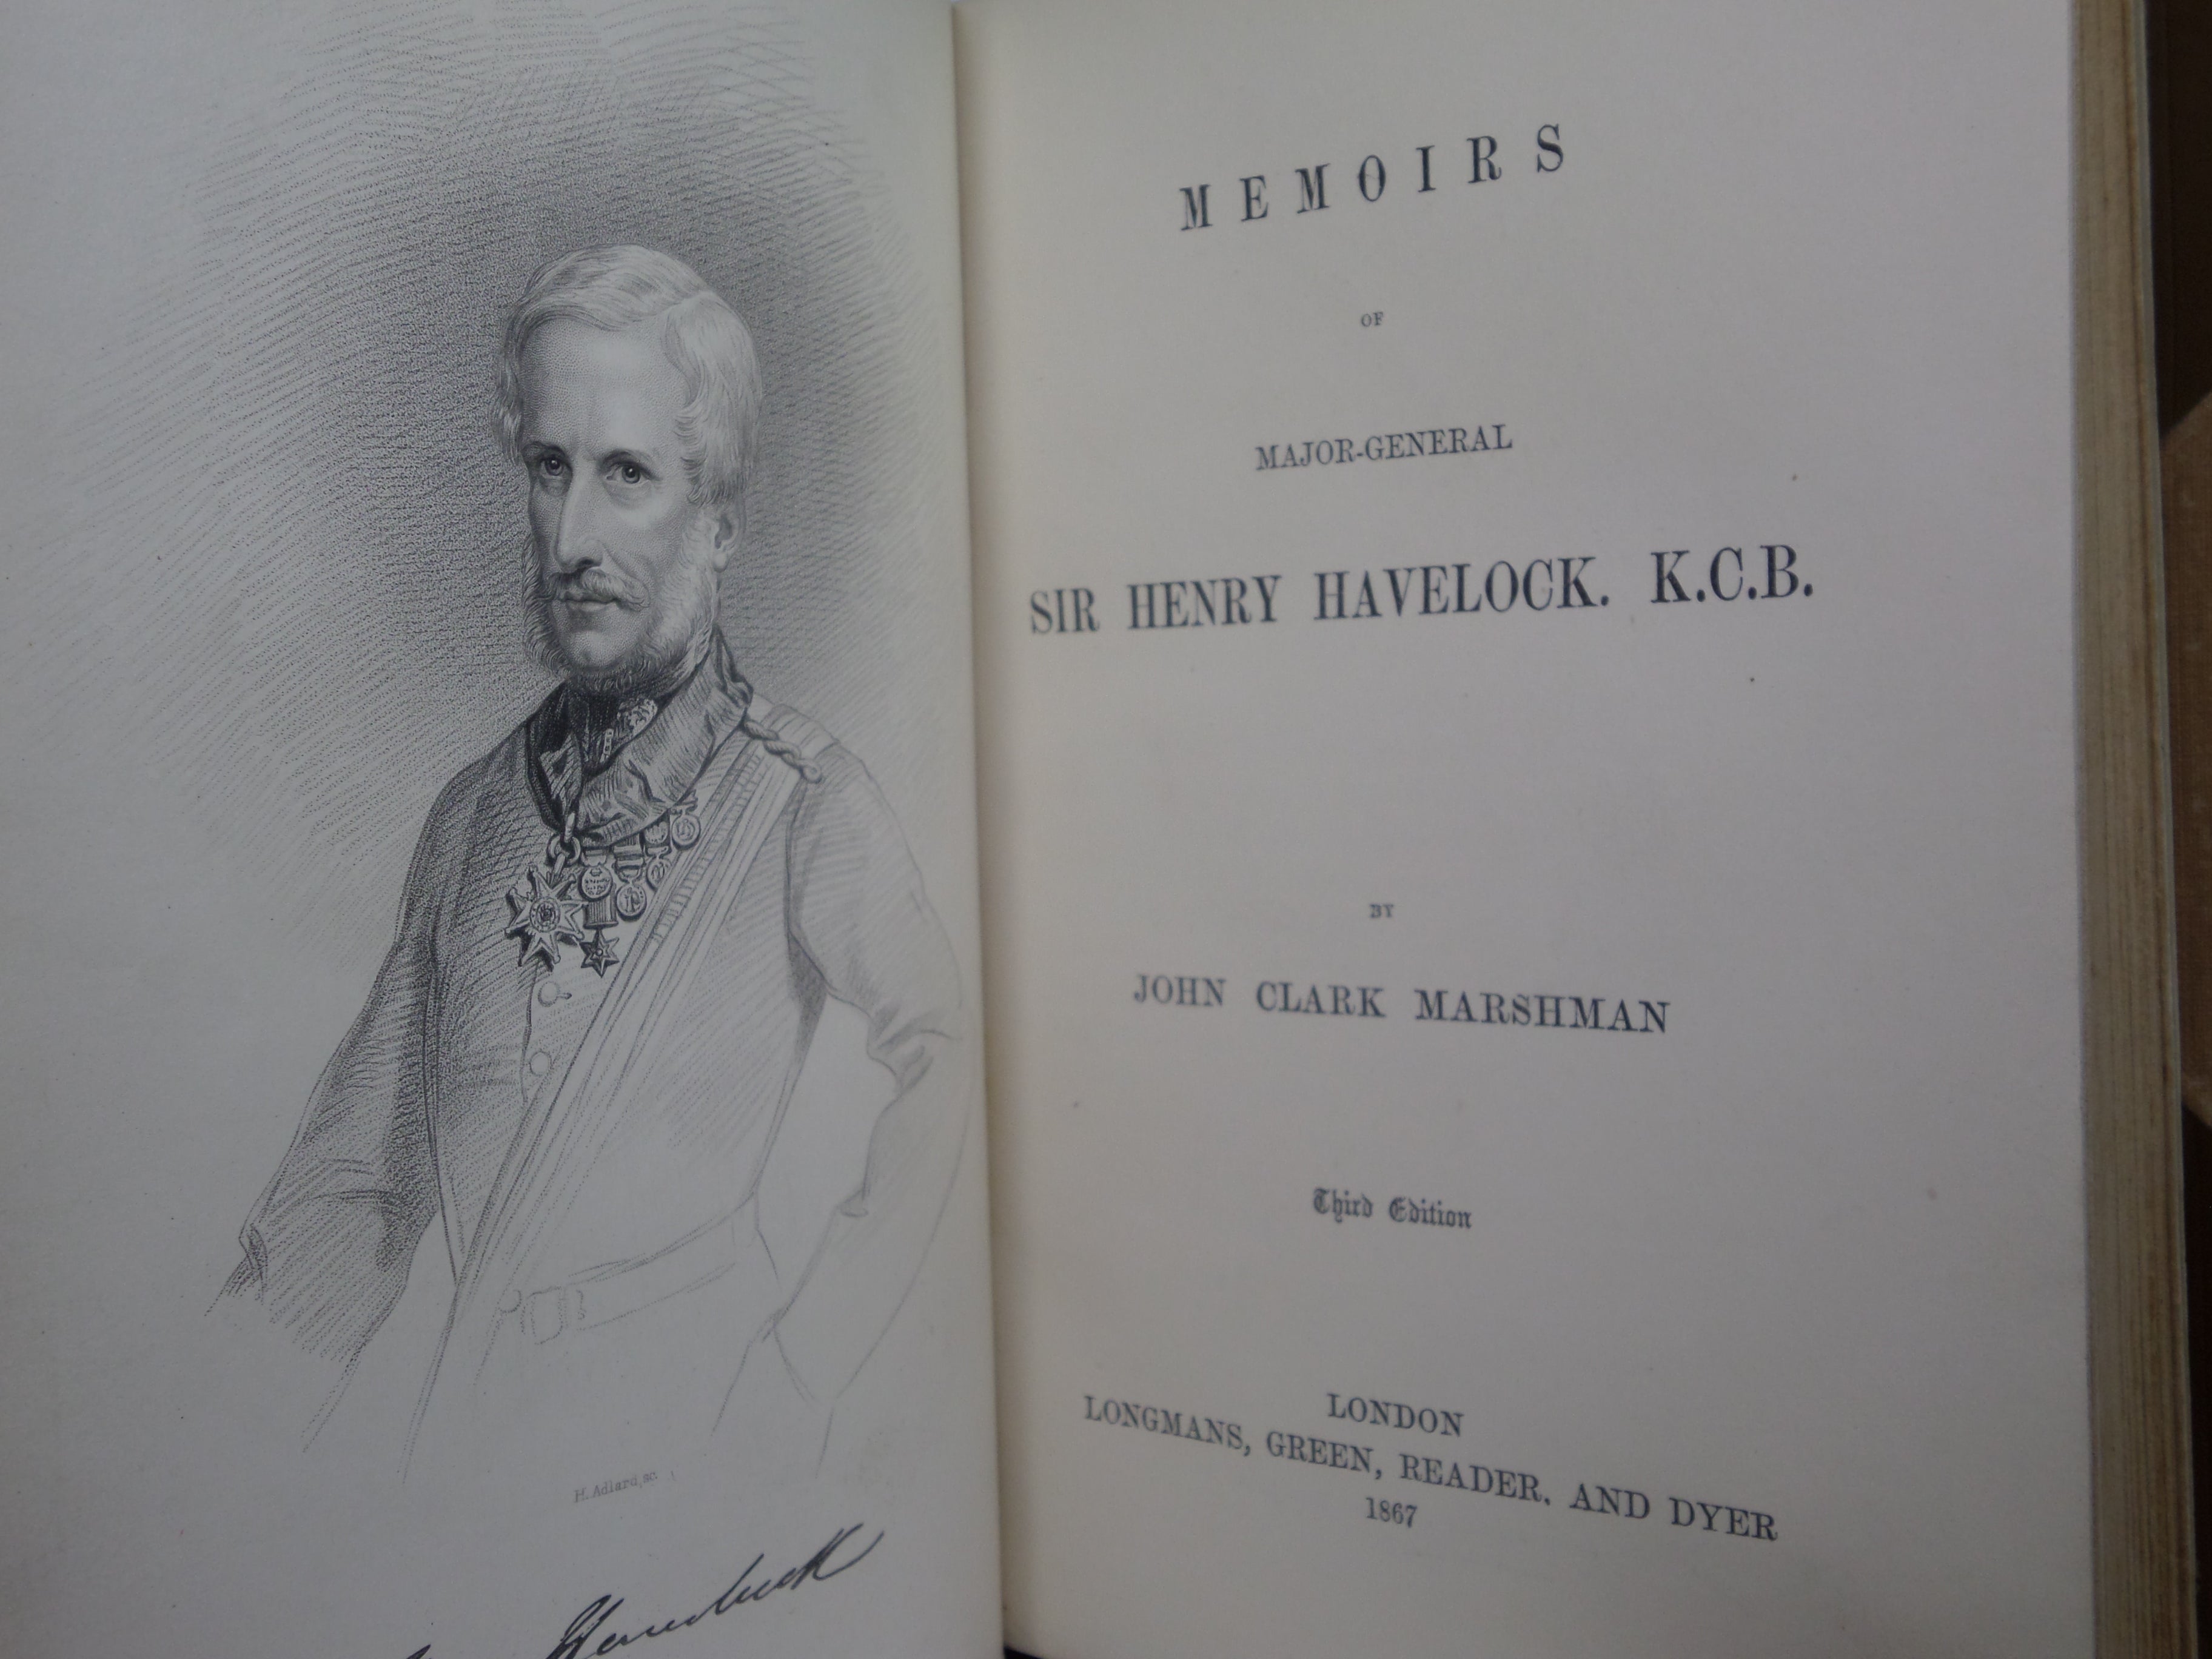 MEMOIRS OF MAJOR-GENERAL SIR HENRY HAVELOCK BY JOHN CLARK MARSHMAN 1867 FINELY BOUND BY BAYNTUN-RIVIERE